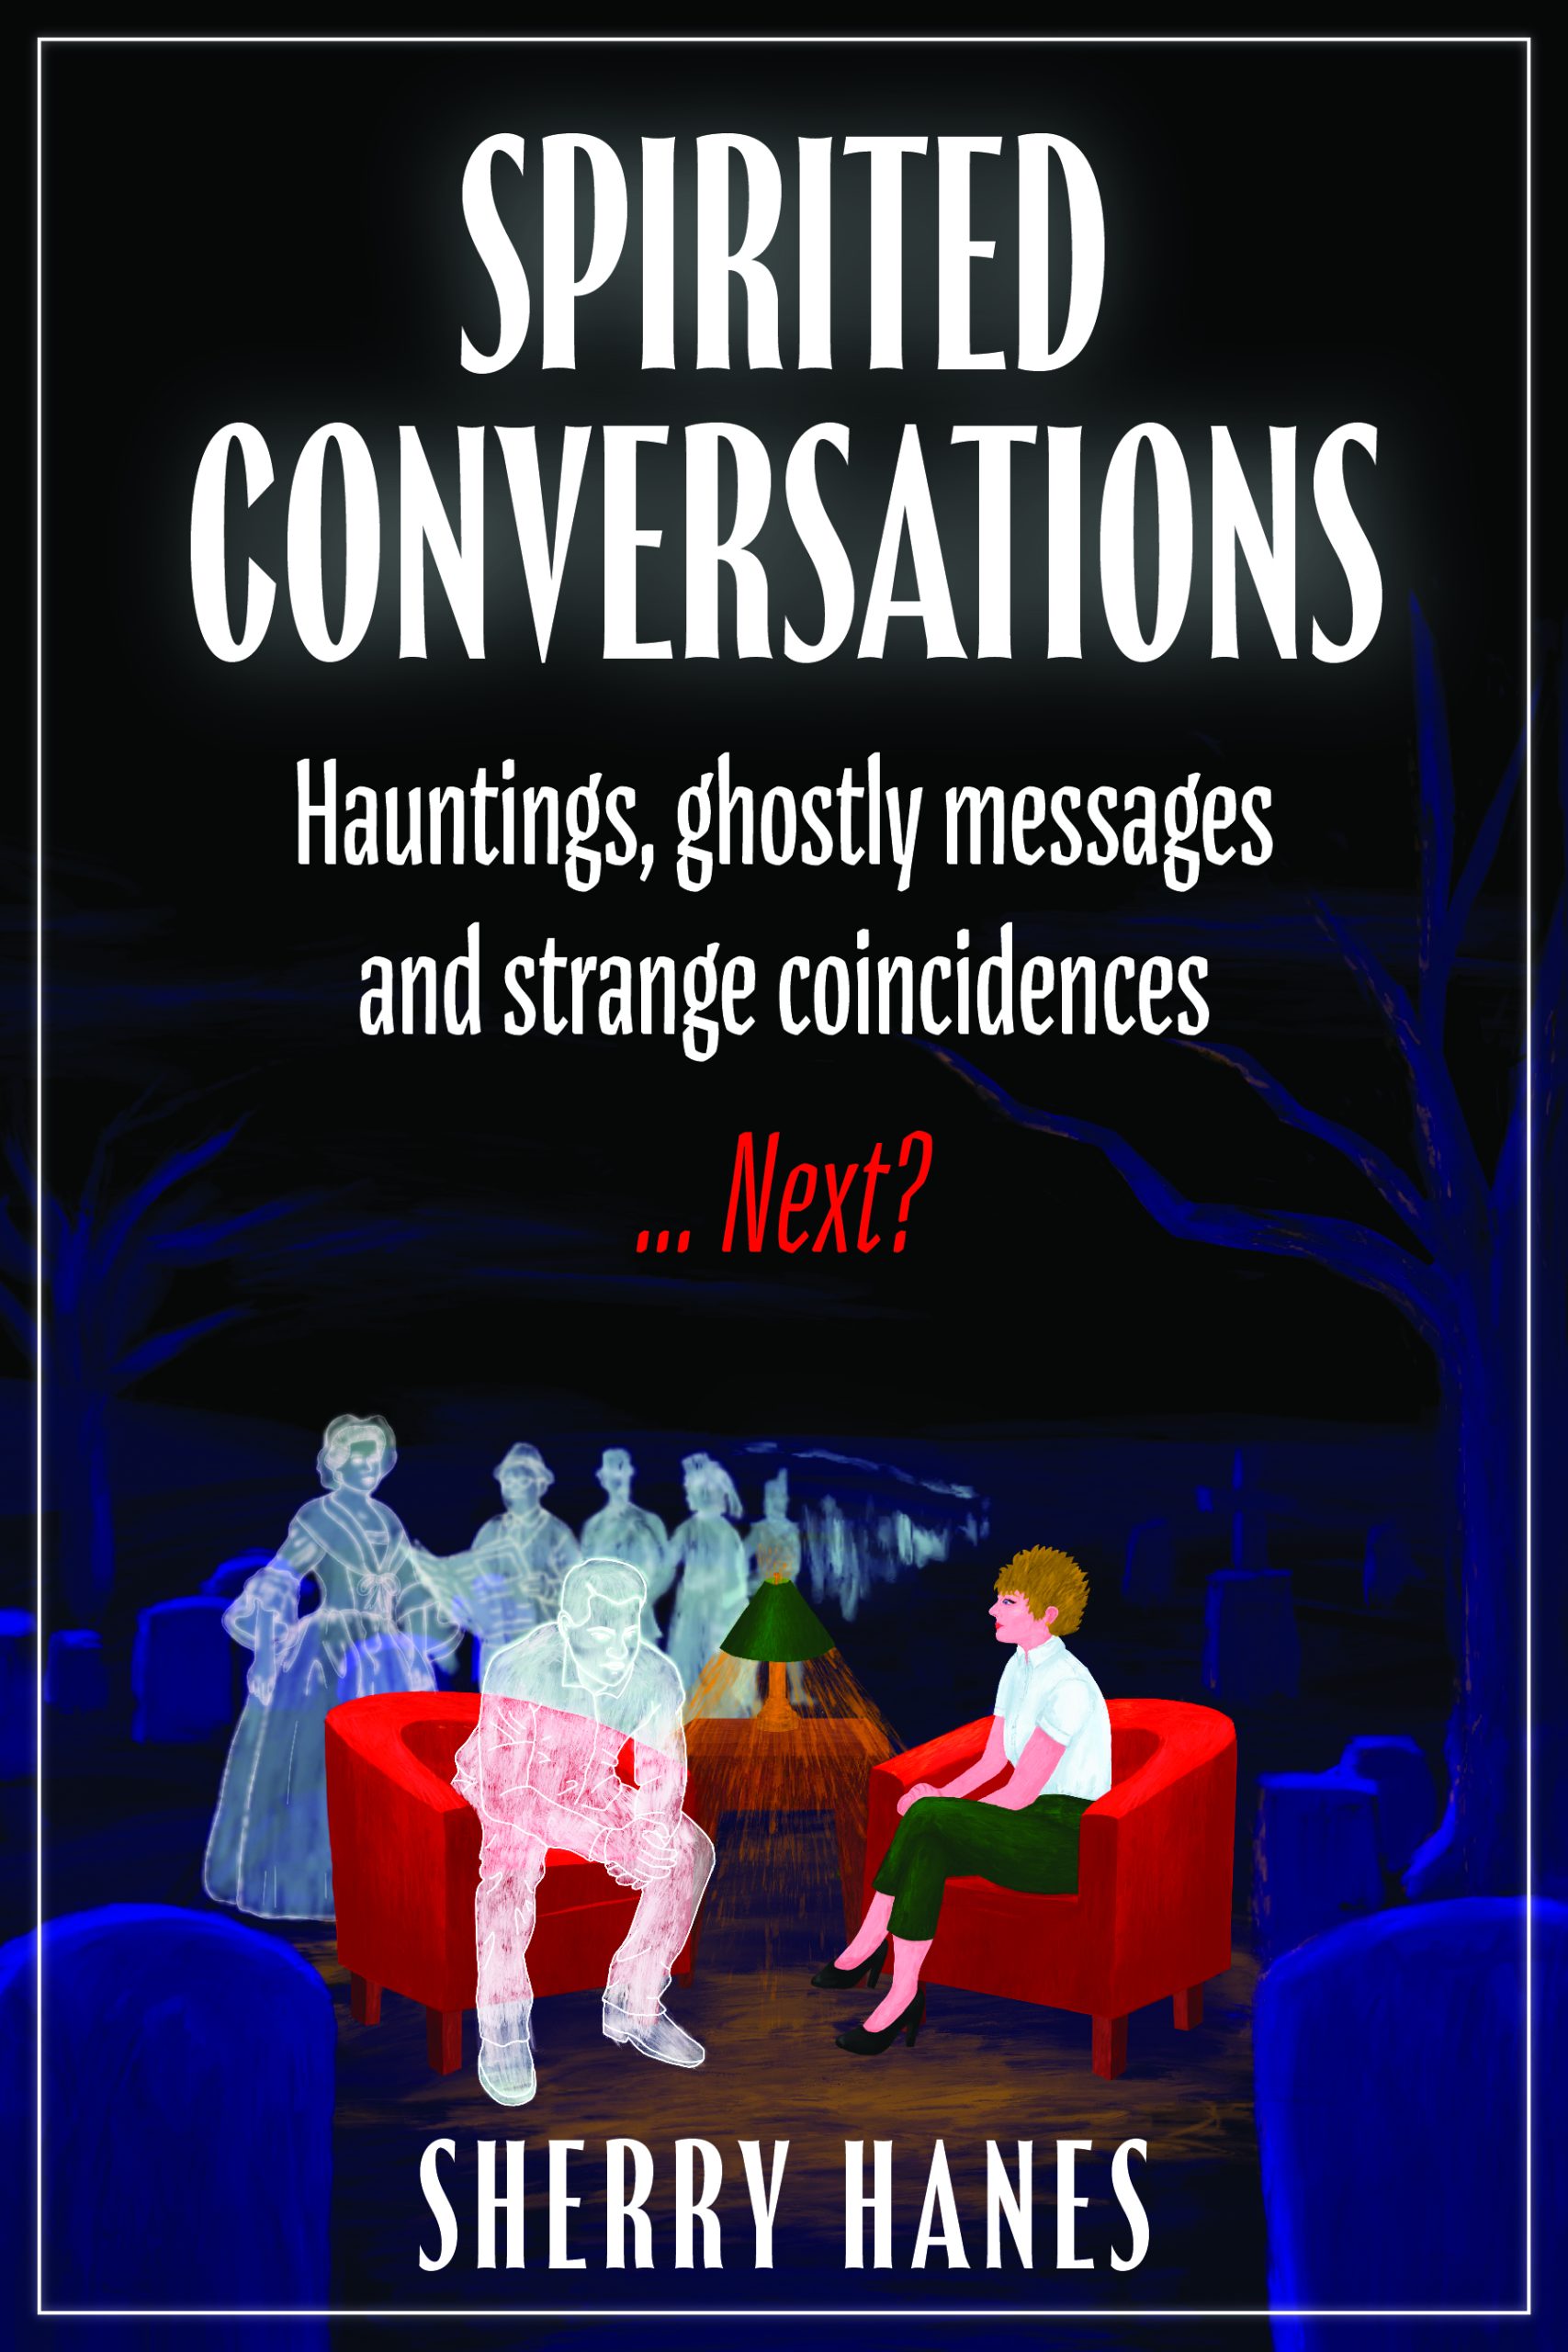 Sherry Hanes – Hauntings, Ghostly Messages and Strange Coincidences… Next?